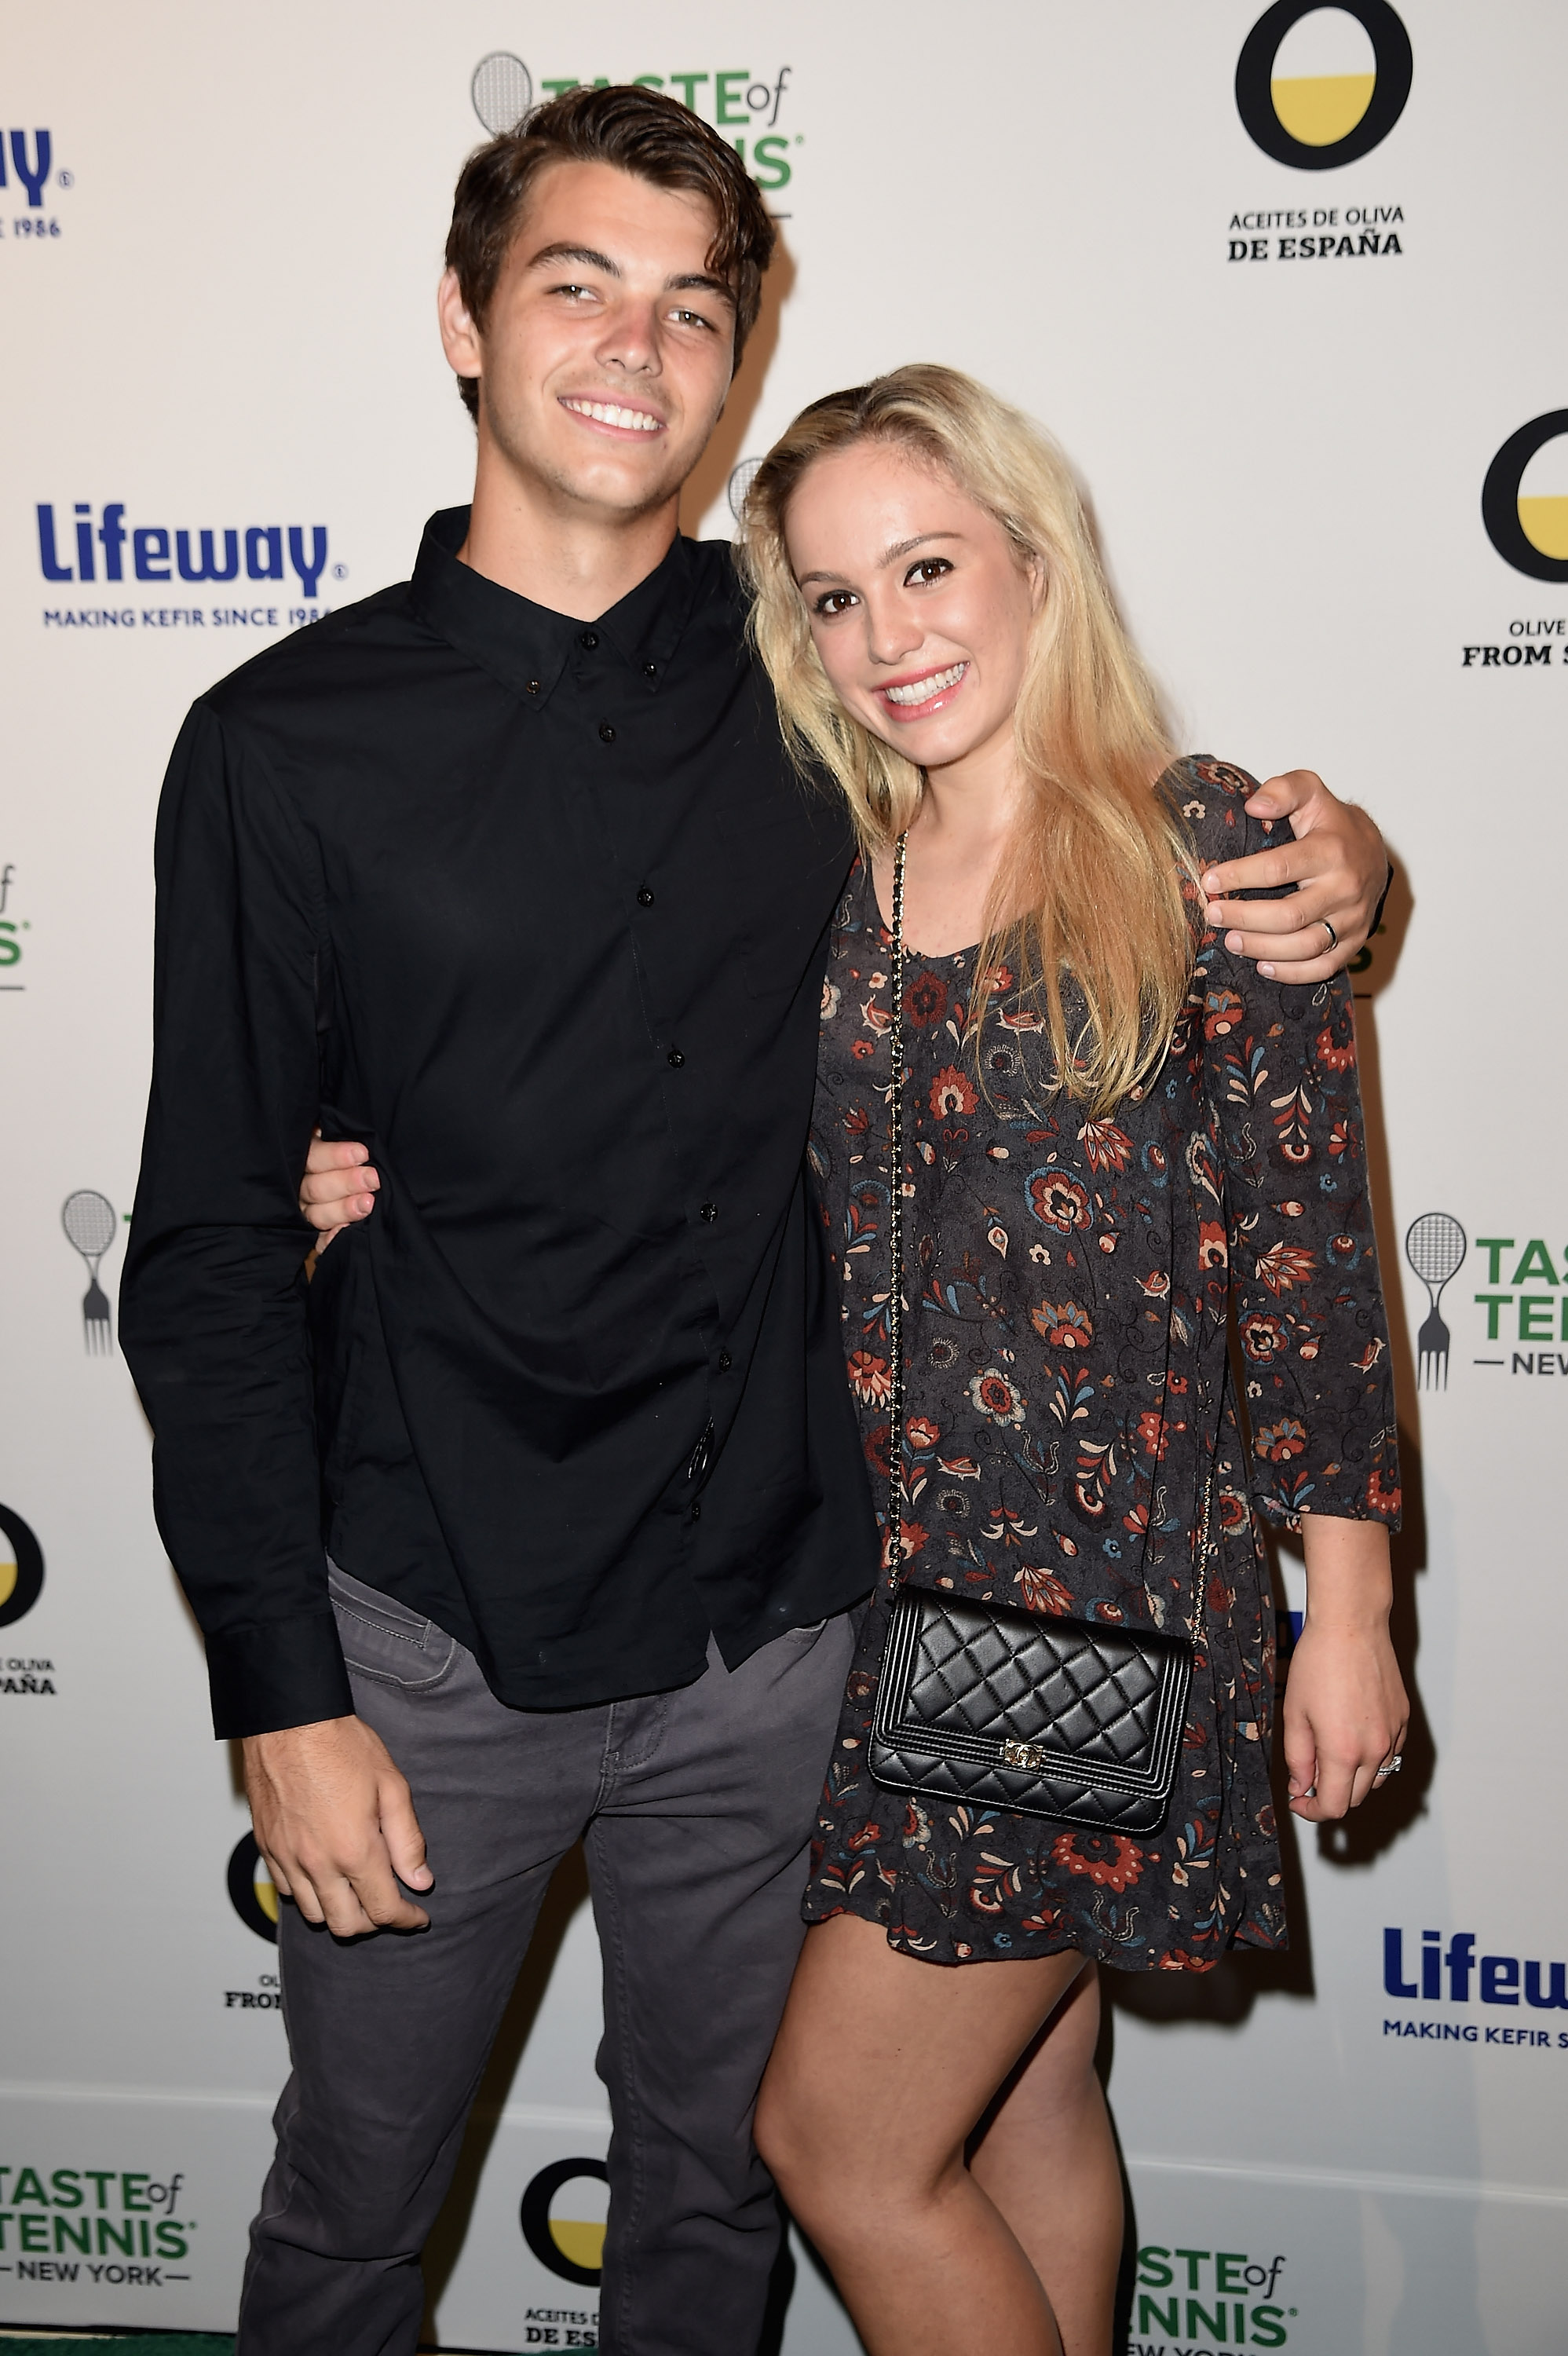 Taylor Fritz and Raquel Pedraza attend Taste Of Tennis New York on August 25, 2016, in New York City. | Source: Getty Images